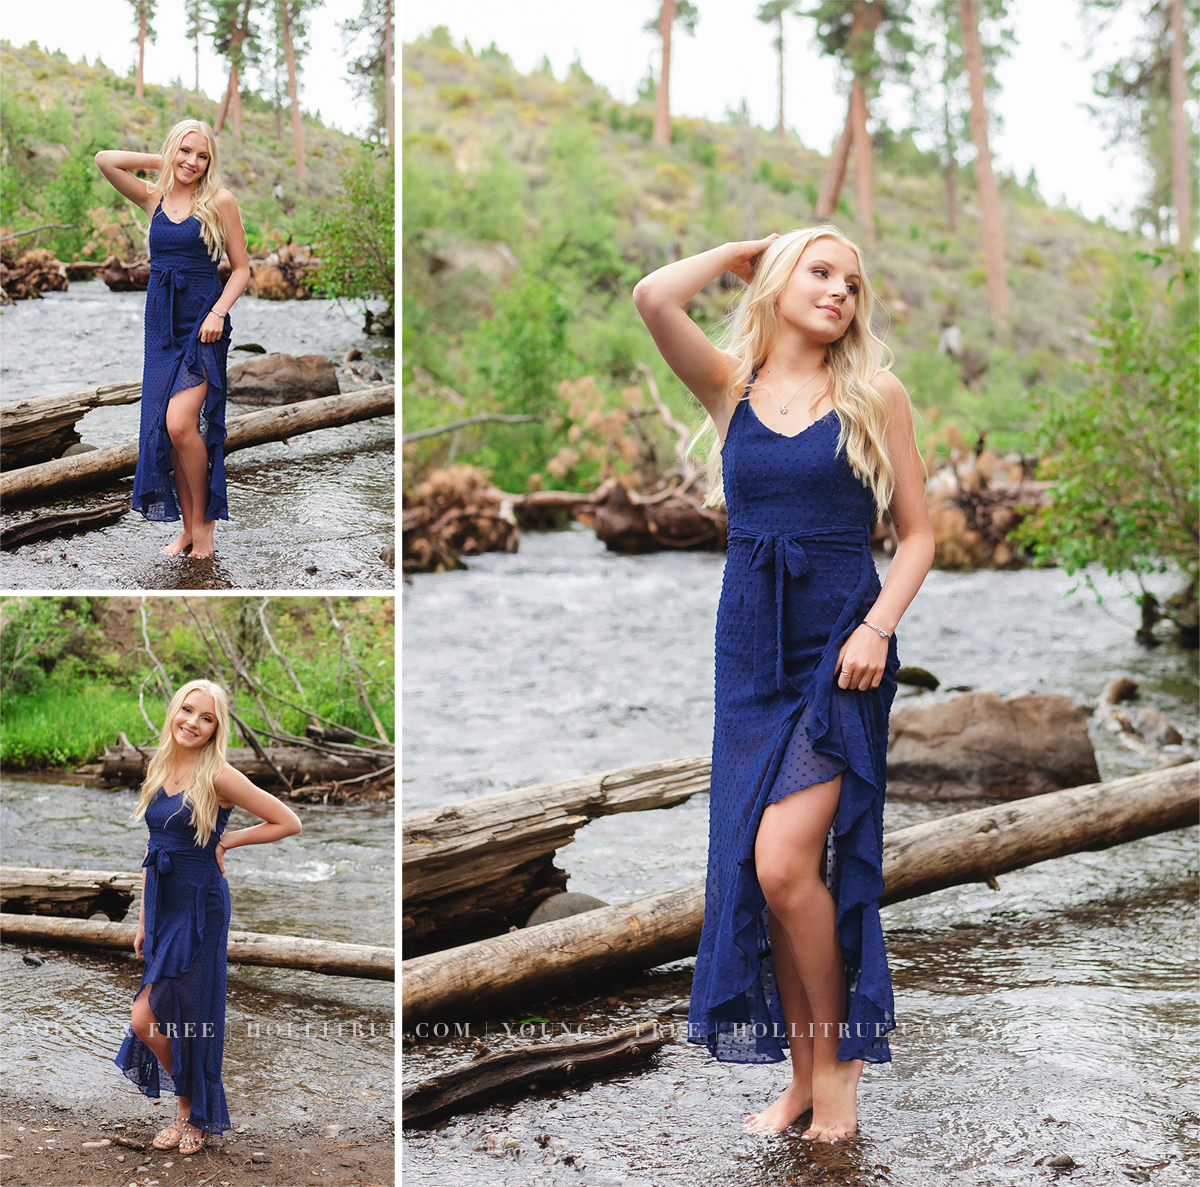 Senior pictures of a girl in a river wearing a beautiful blue dress by Oregon Senior Photographer, Holli True